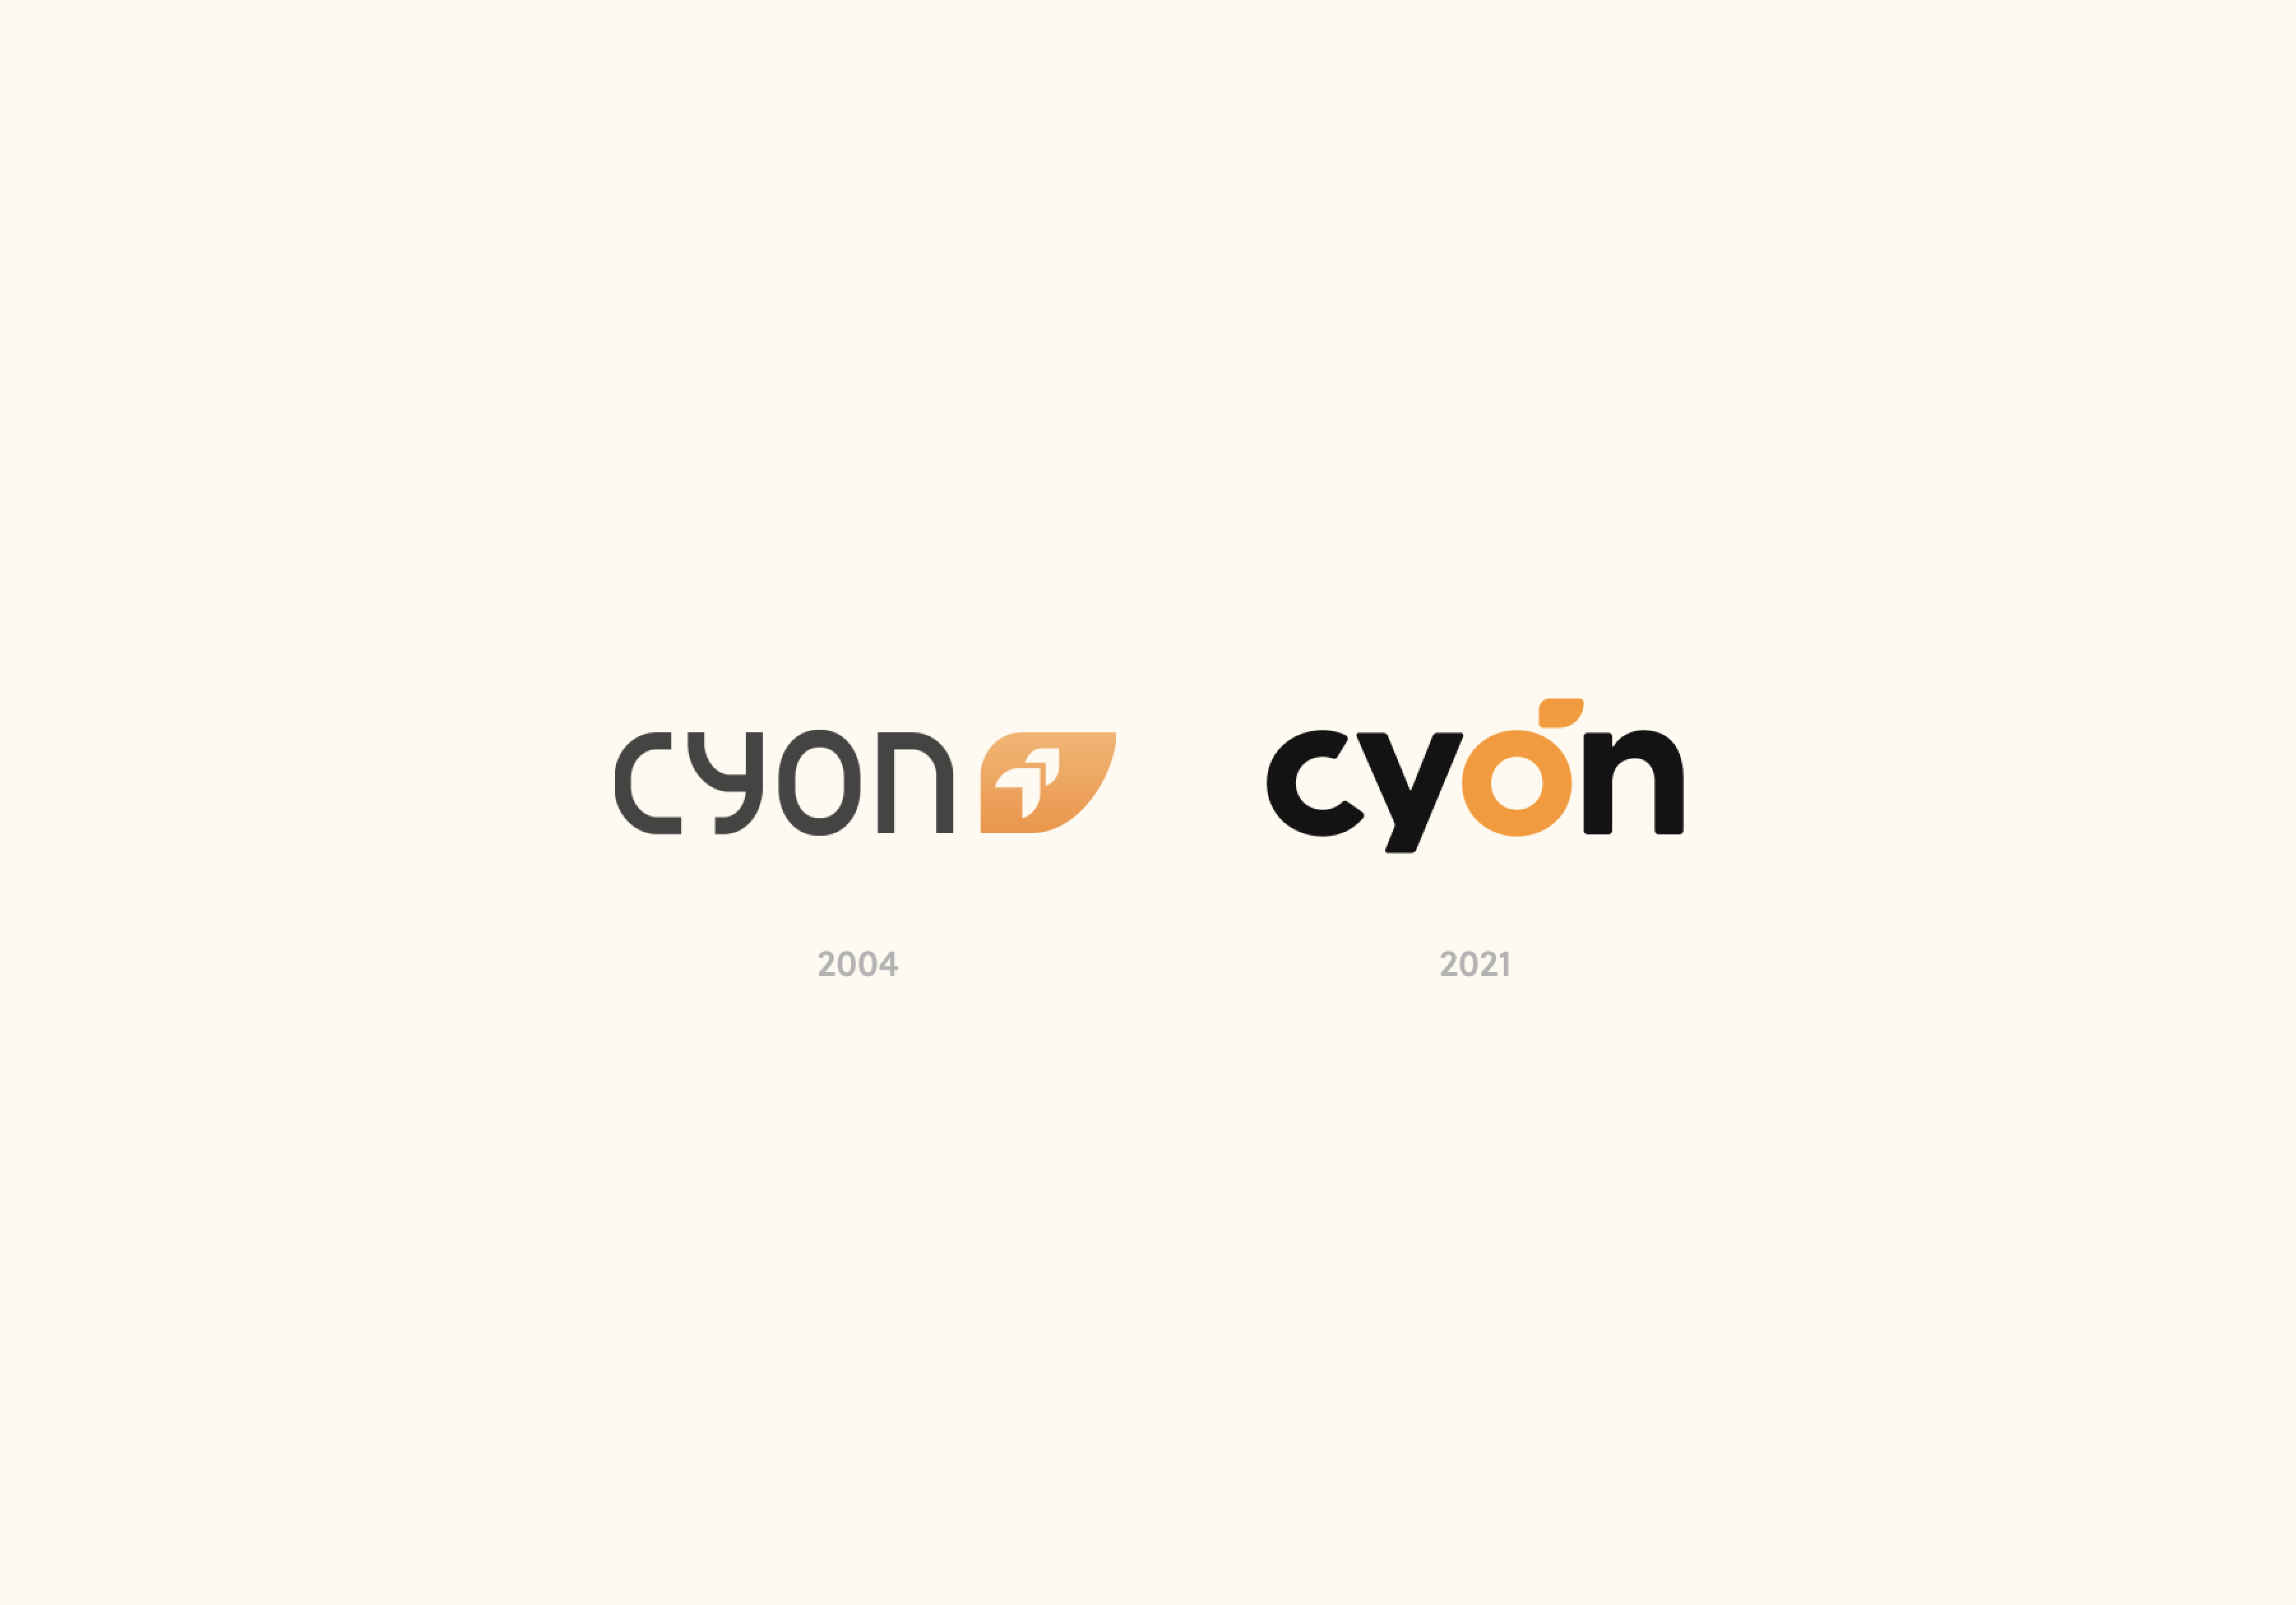 cyon logo from 2004 and 2021